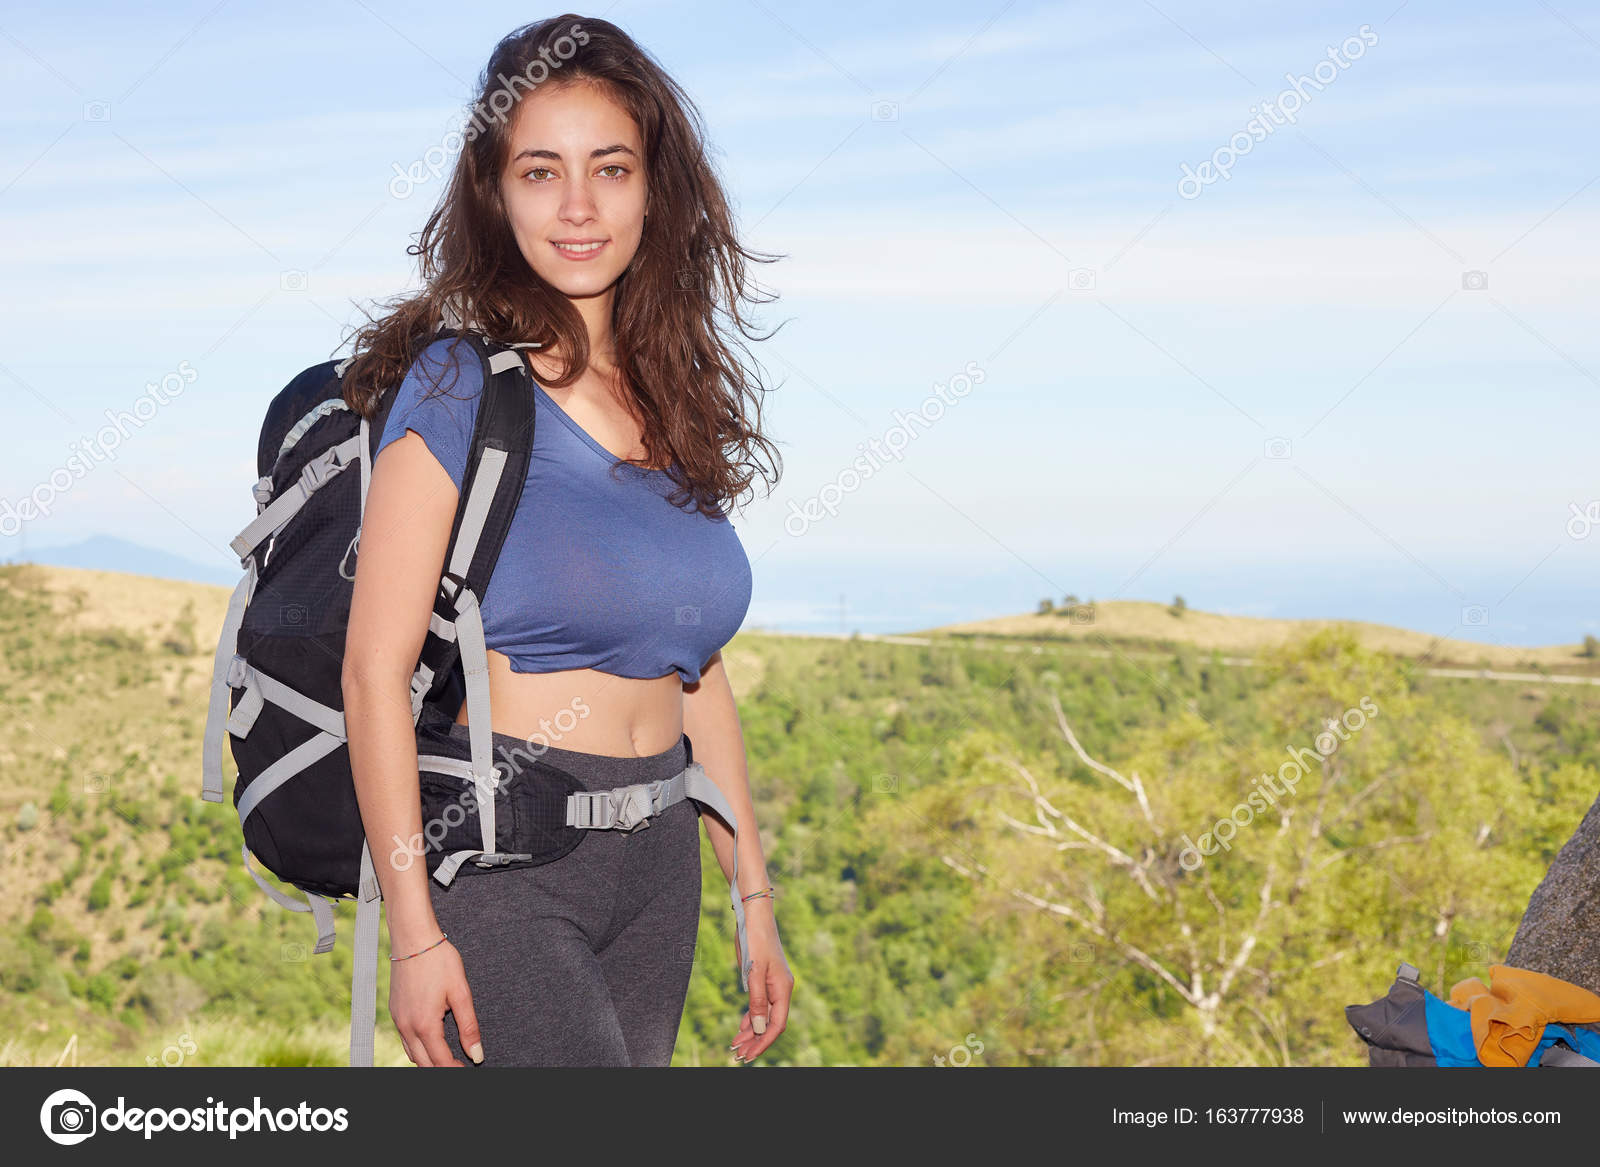 Woman hiker smiling and walking with hiking poles. Stock Photo by